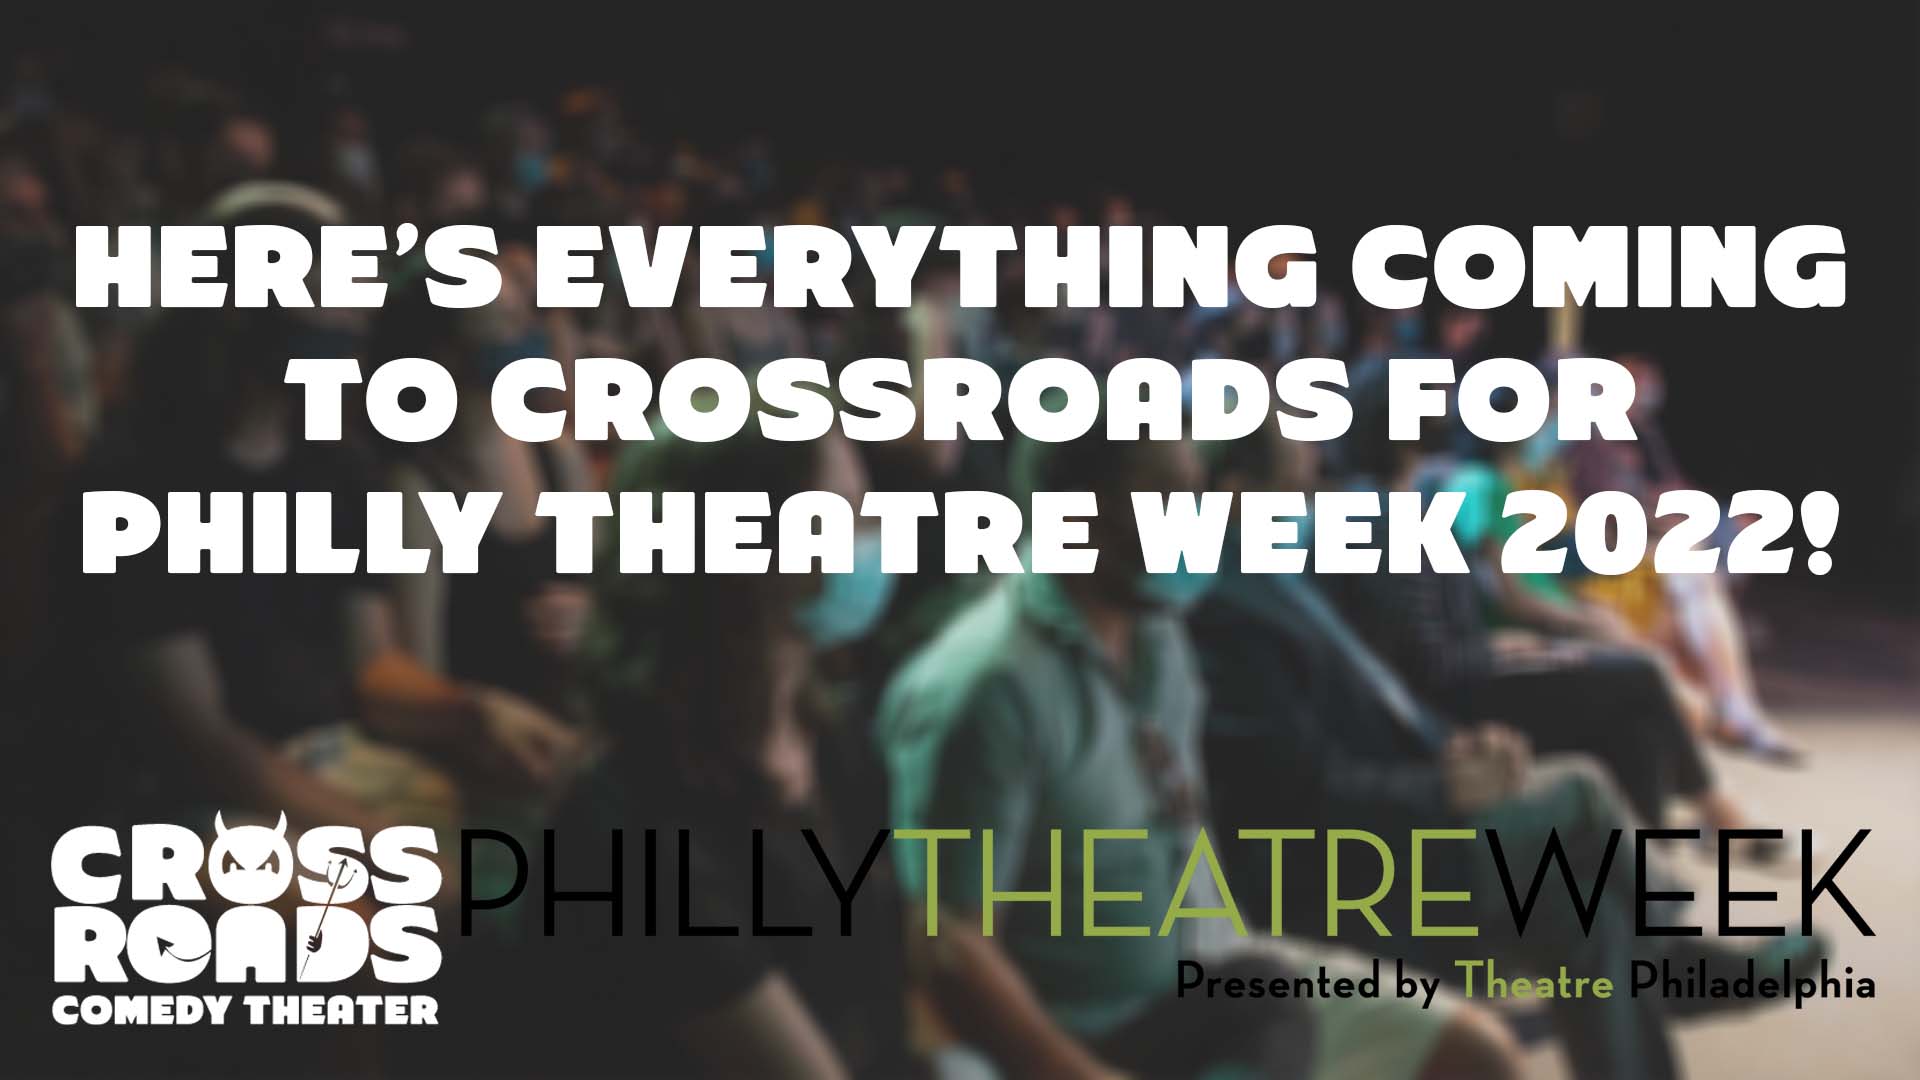 Here’s Everything Coming to Crossroads for Philly Theatre Week 2022!